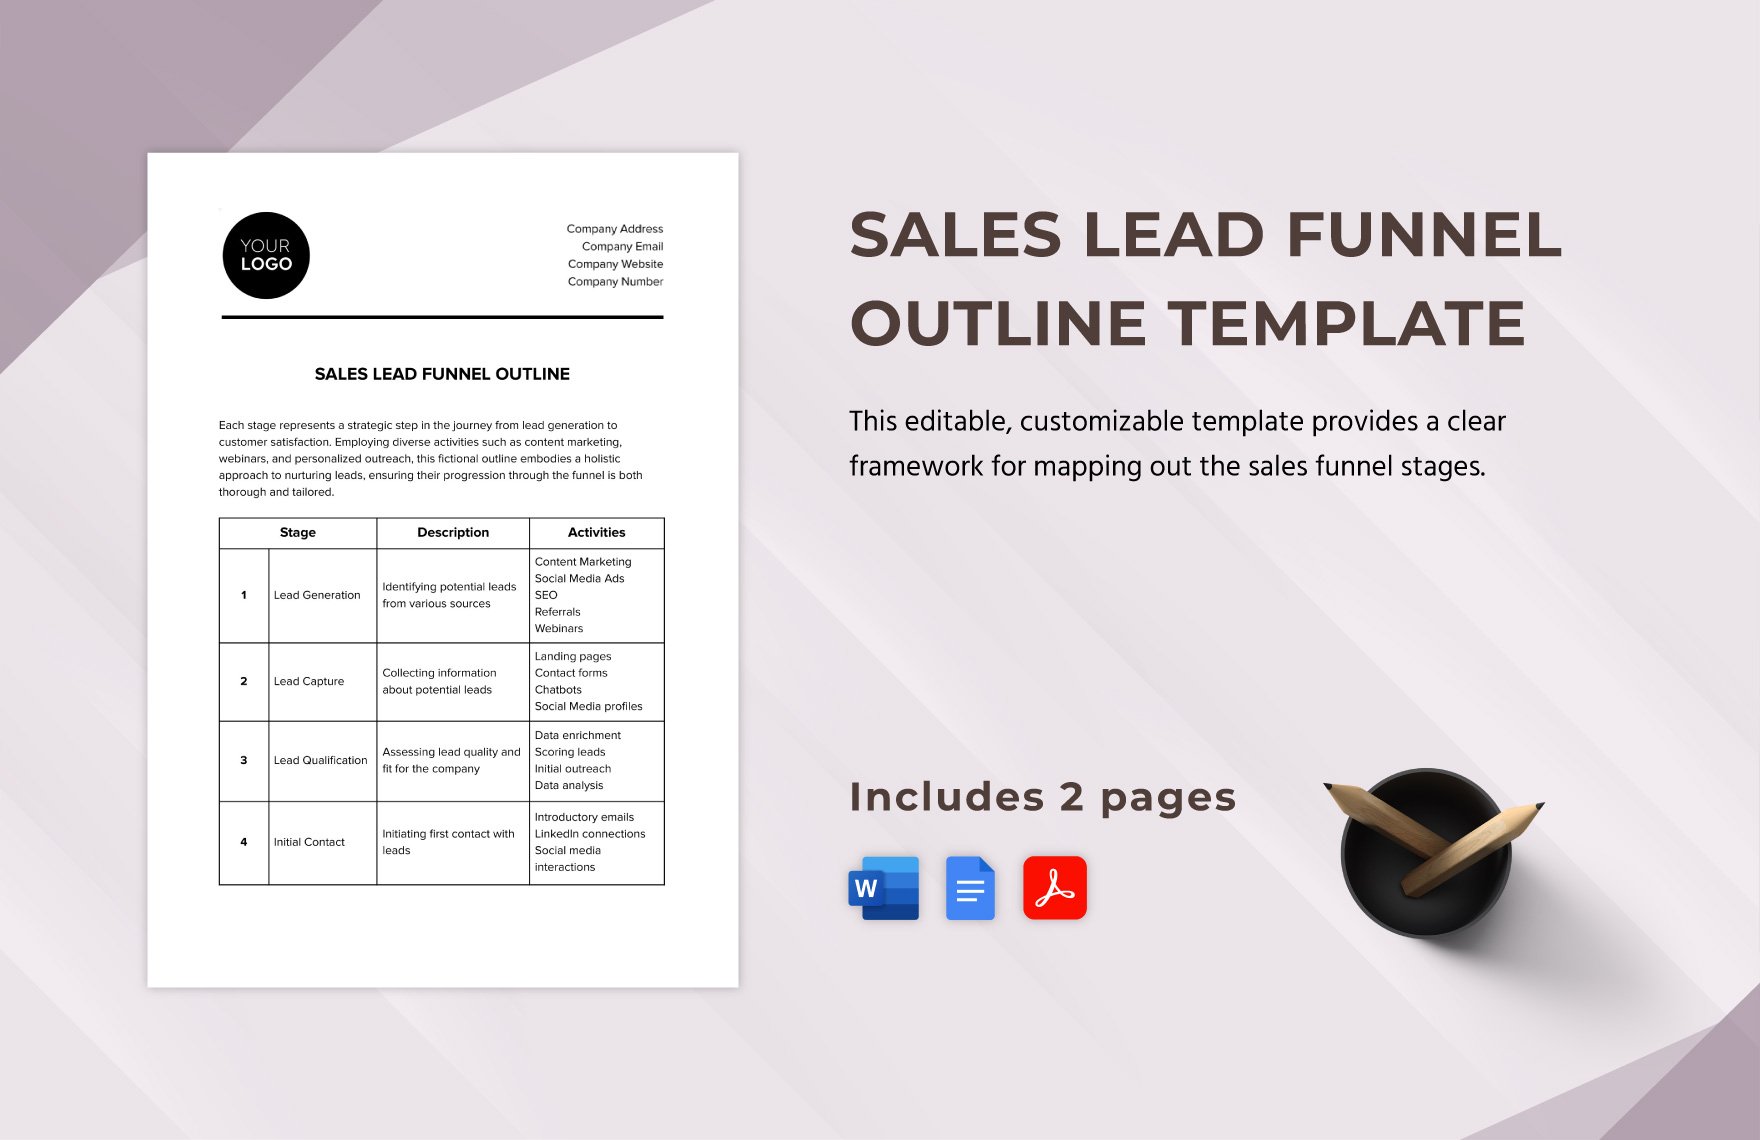 Sales Lead Funnel Outline Template in Word, Google Docs, PDF